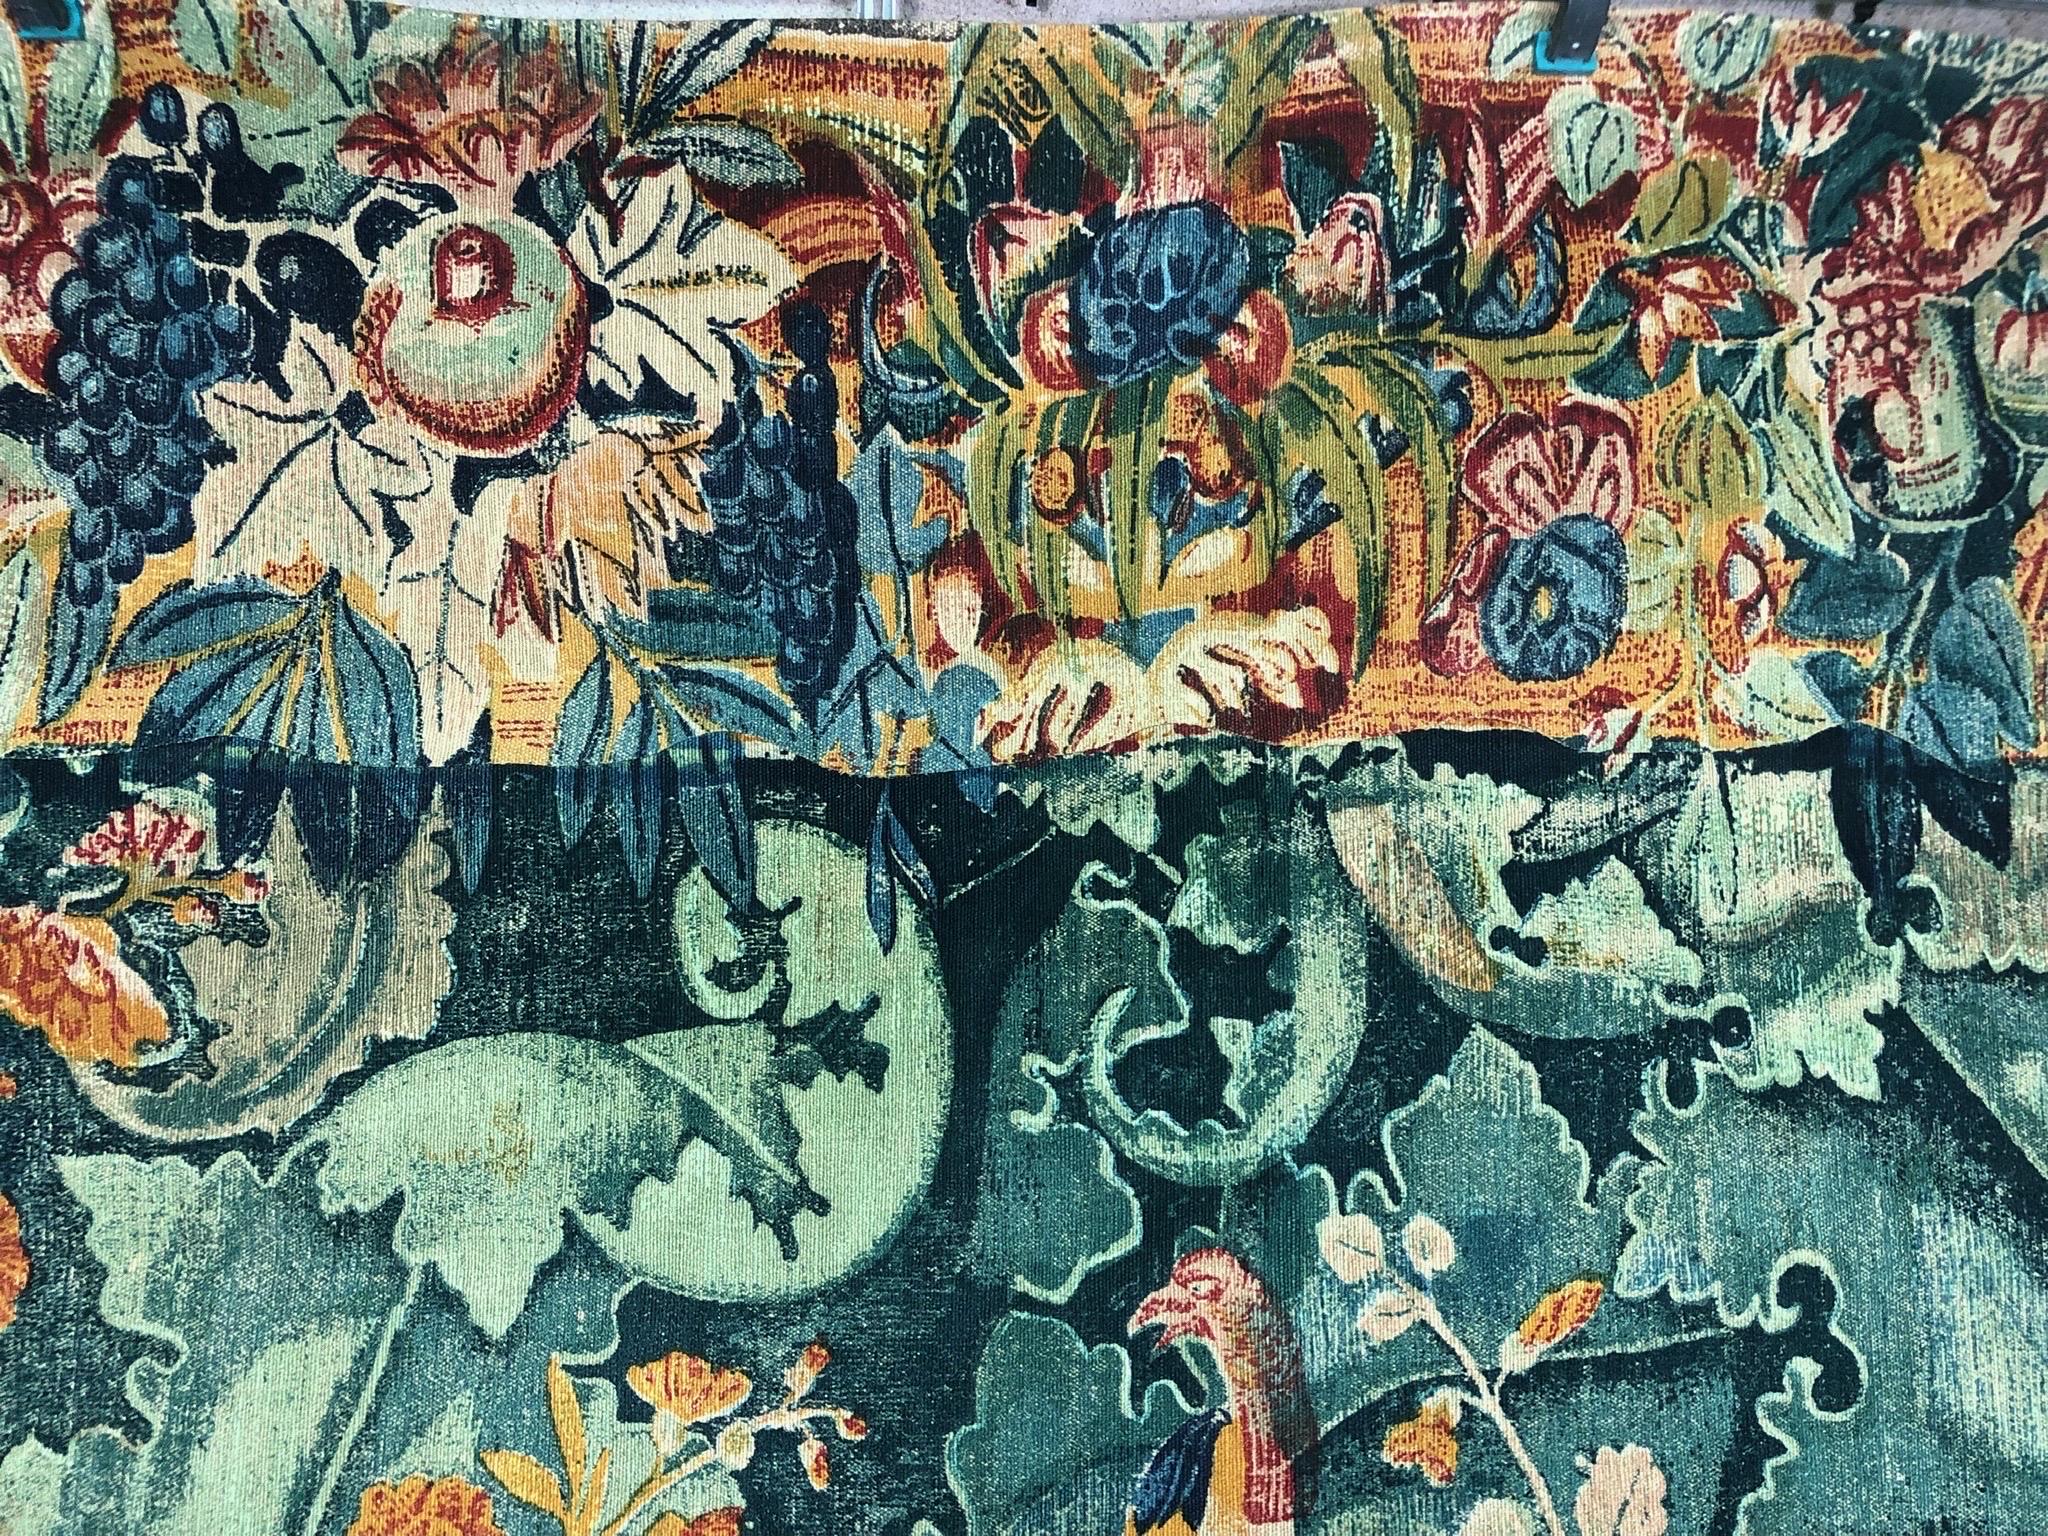 Beautiful vintage French tapestry decorated with aristolochia style feuilles de choux which can be found in the Audenarde tapestries dating from the 15th and 16th centuries.